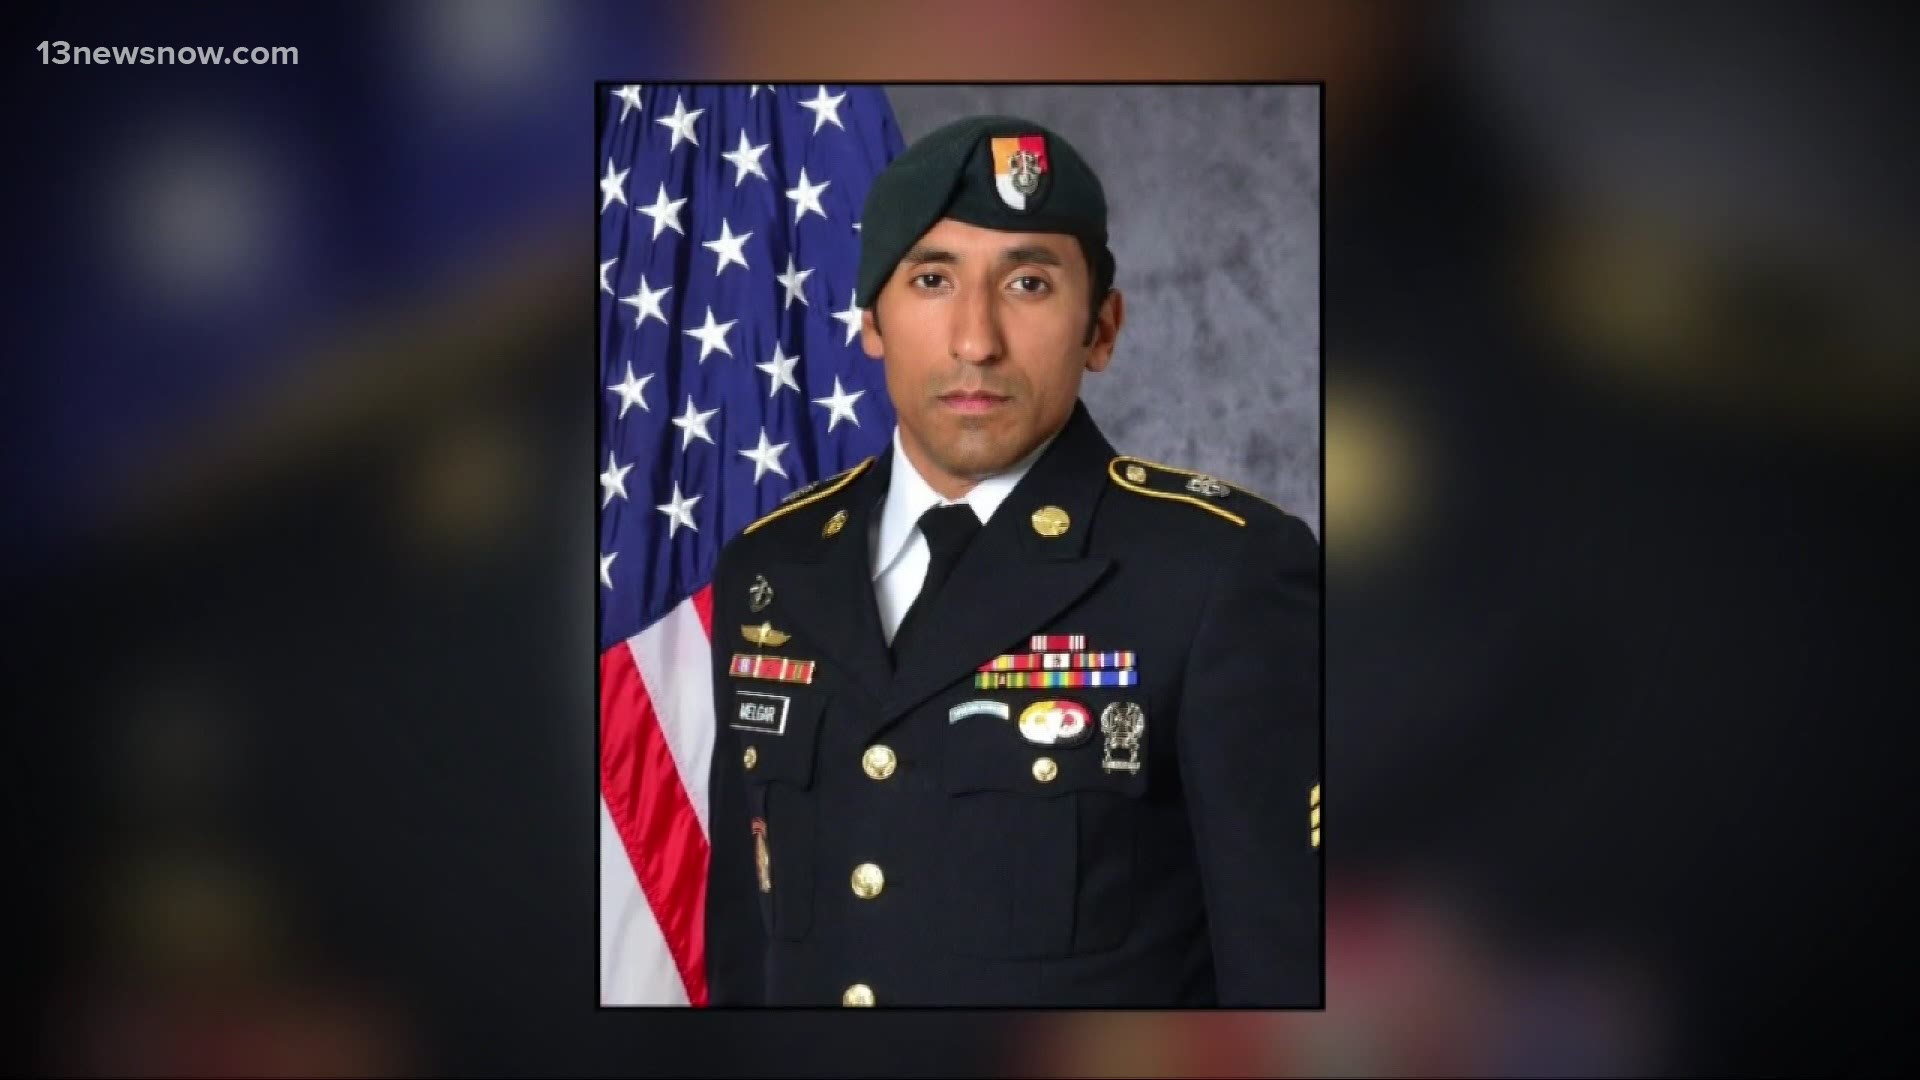 Chief Petty Officer Tony DeDolph pleaded guilty in a military courtroom at a Navy base in Norfolk. The Green Beret who died was Army Staff Sgt. Logan Melgar.